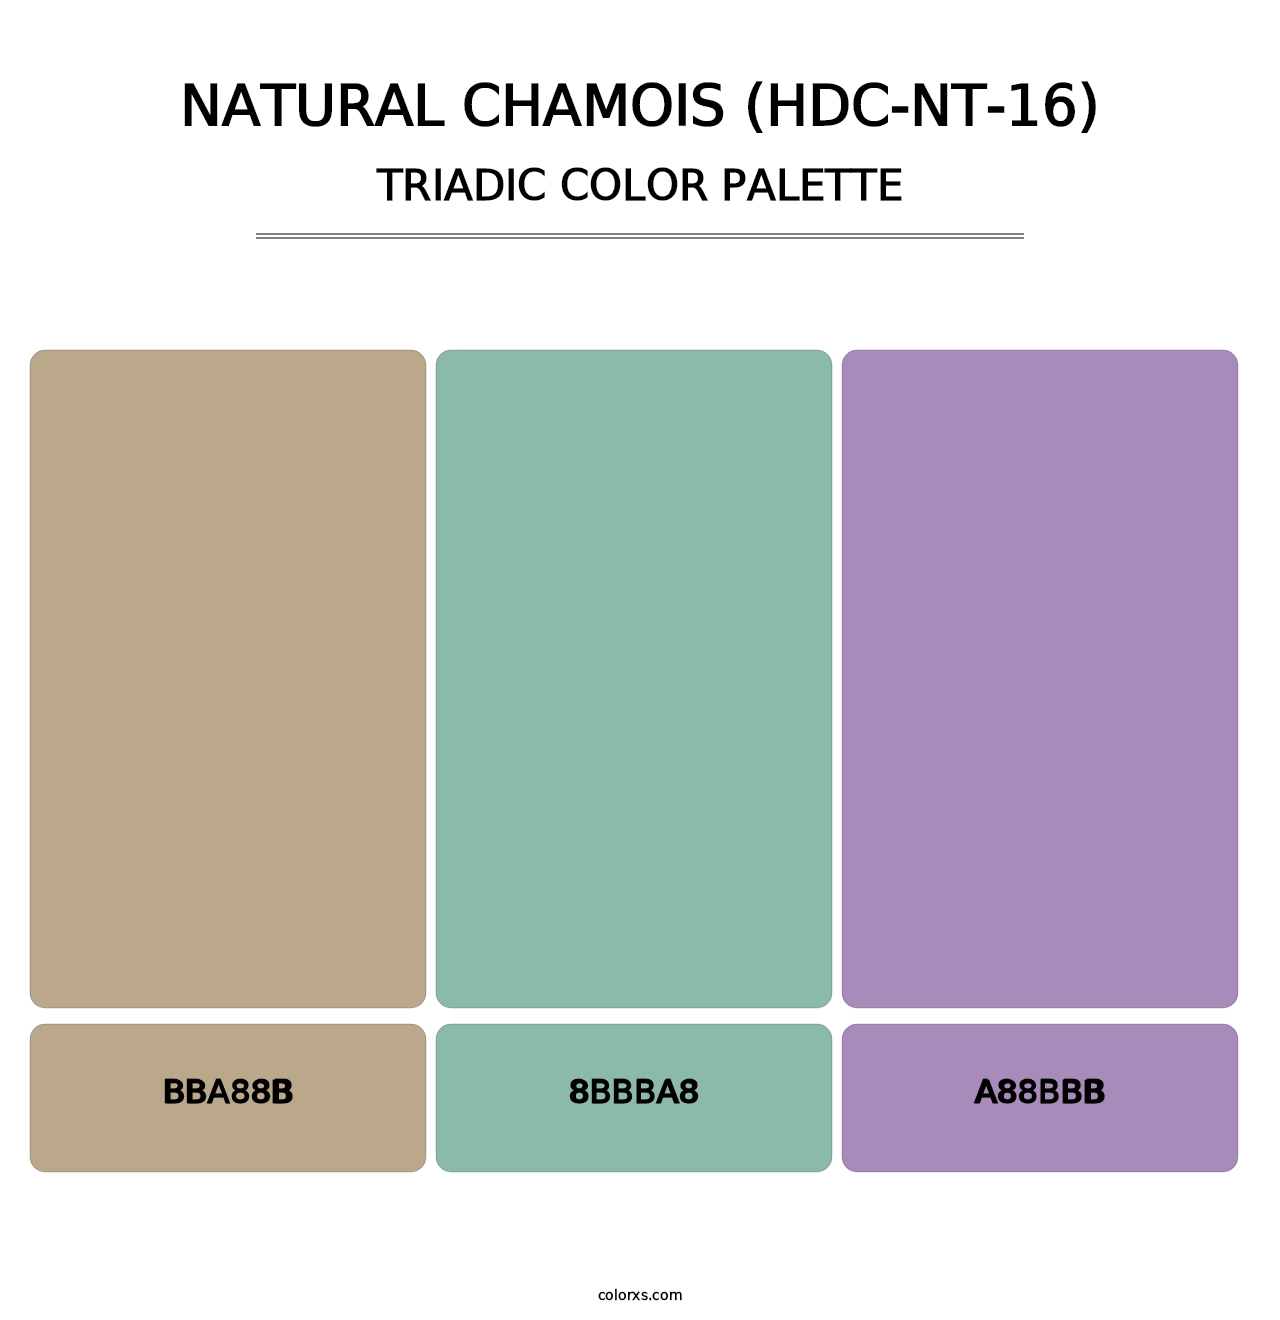 Natural Chamois (HDC-NT-16) - Triadic Color Palette